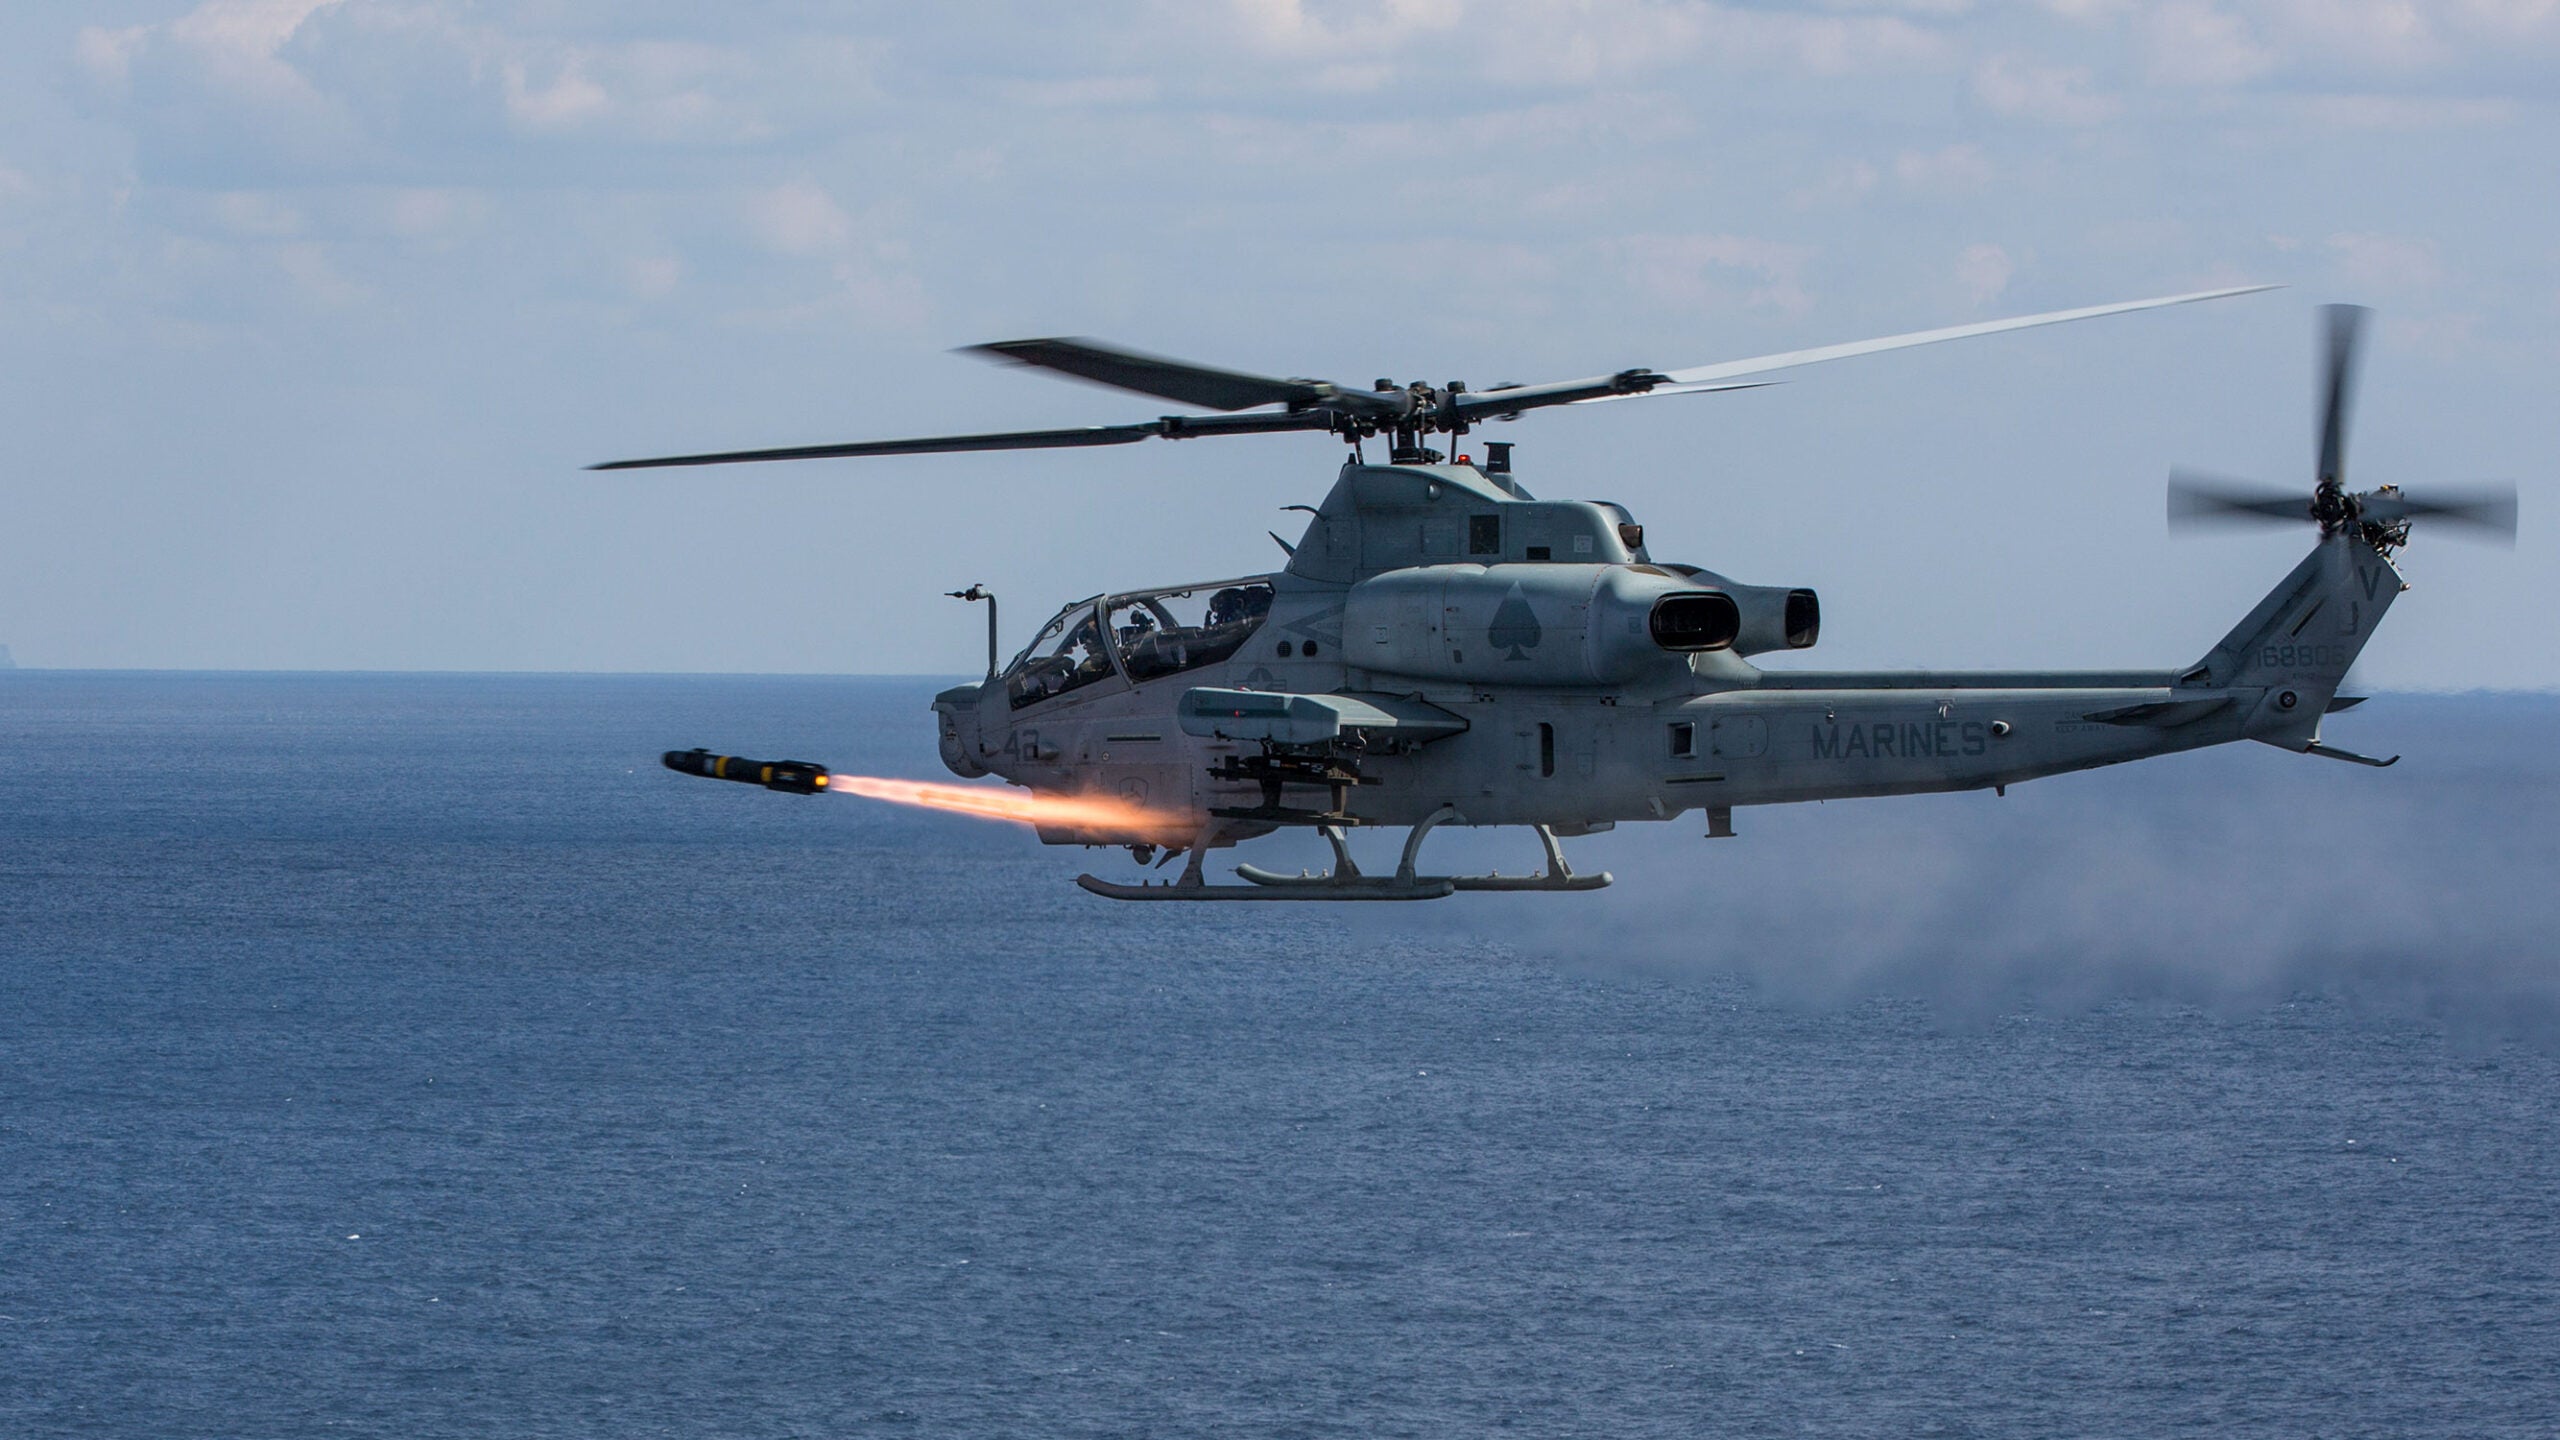 An AH-1Z Viper with Marine Light Attack Helicopter Squadron (HMLA) 267, 3rd Marine Aircraft Wing, fires an AGM-114 Hellfire missile at Range 176, Okinawa, Japan, Feb. 14, 2017. HMLA 267 conducted a live fire drill off the coast of Okinawa to demonstrate the capabilities of the AH-1Z Viper helicopter. (U.S. Marine Corps photo by MCIPAC Combat Camera Lance Cpl. Sean M. Evans)